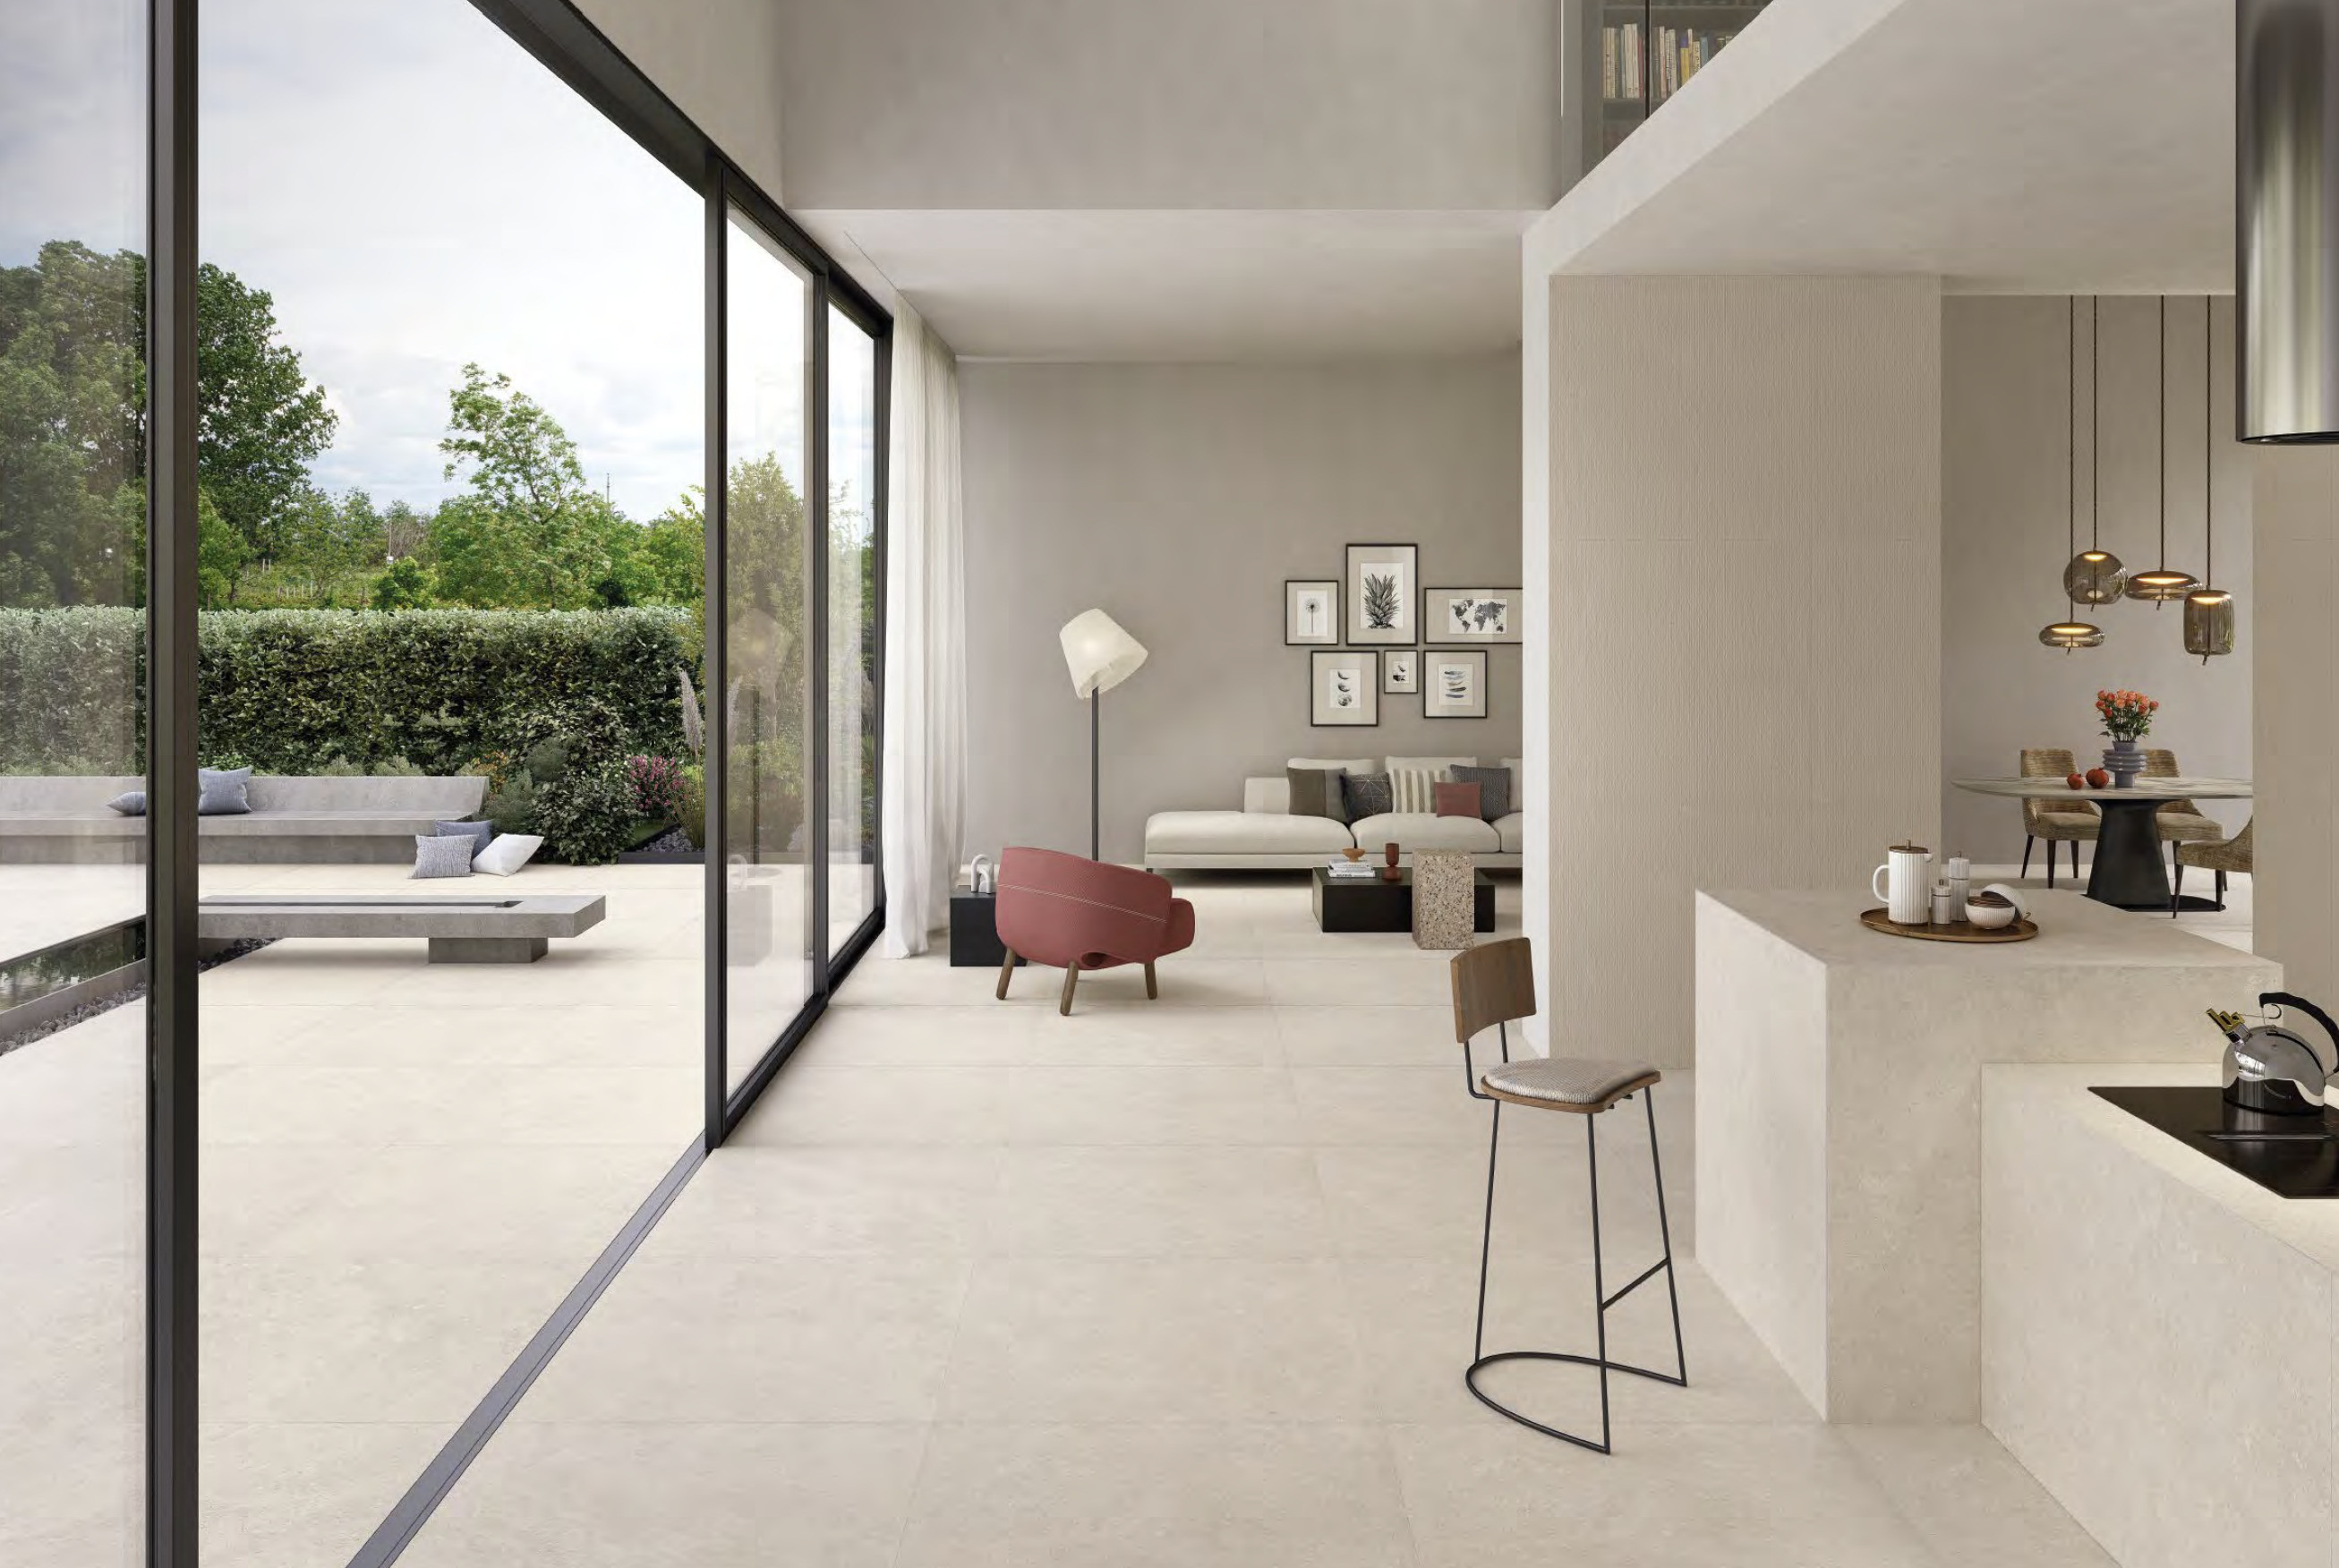 Floor and wall covering in Mapierre Noble Blanc Emilceramica
